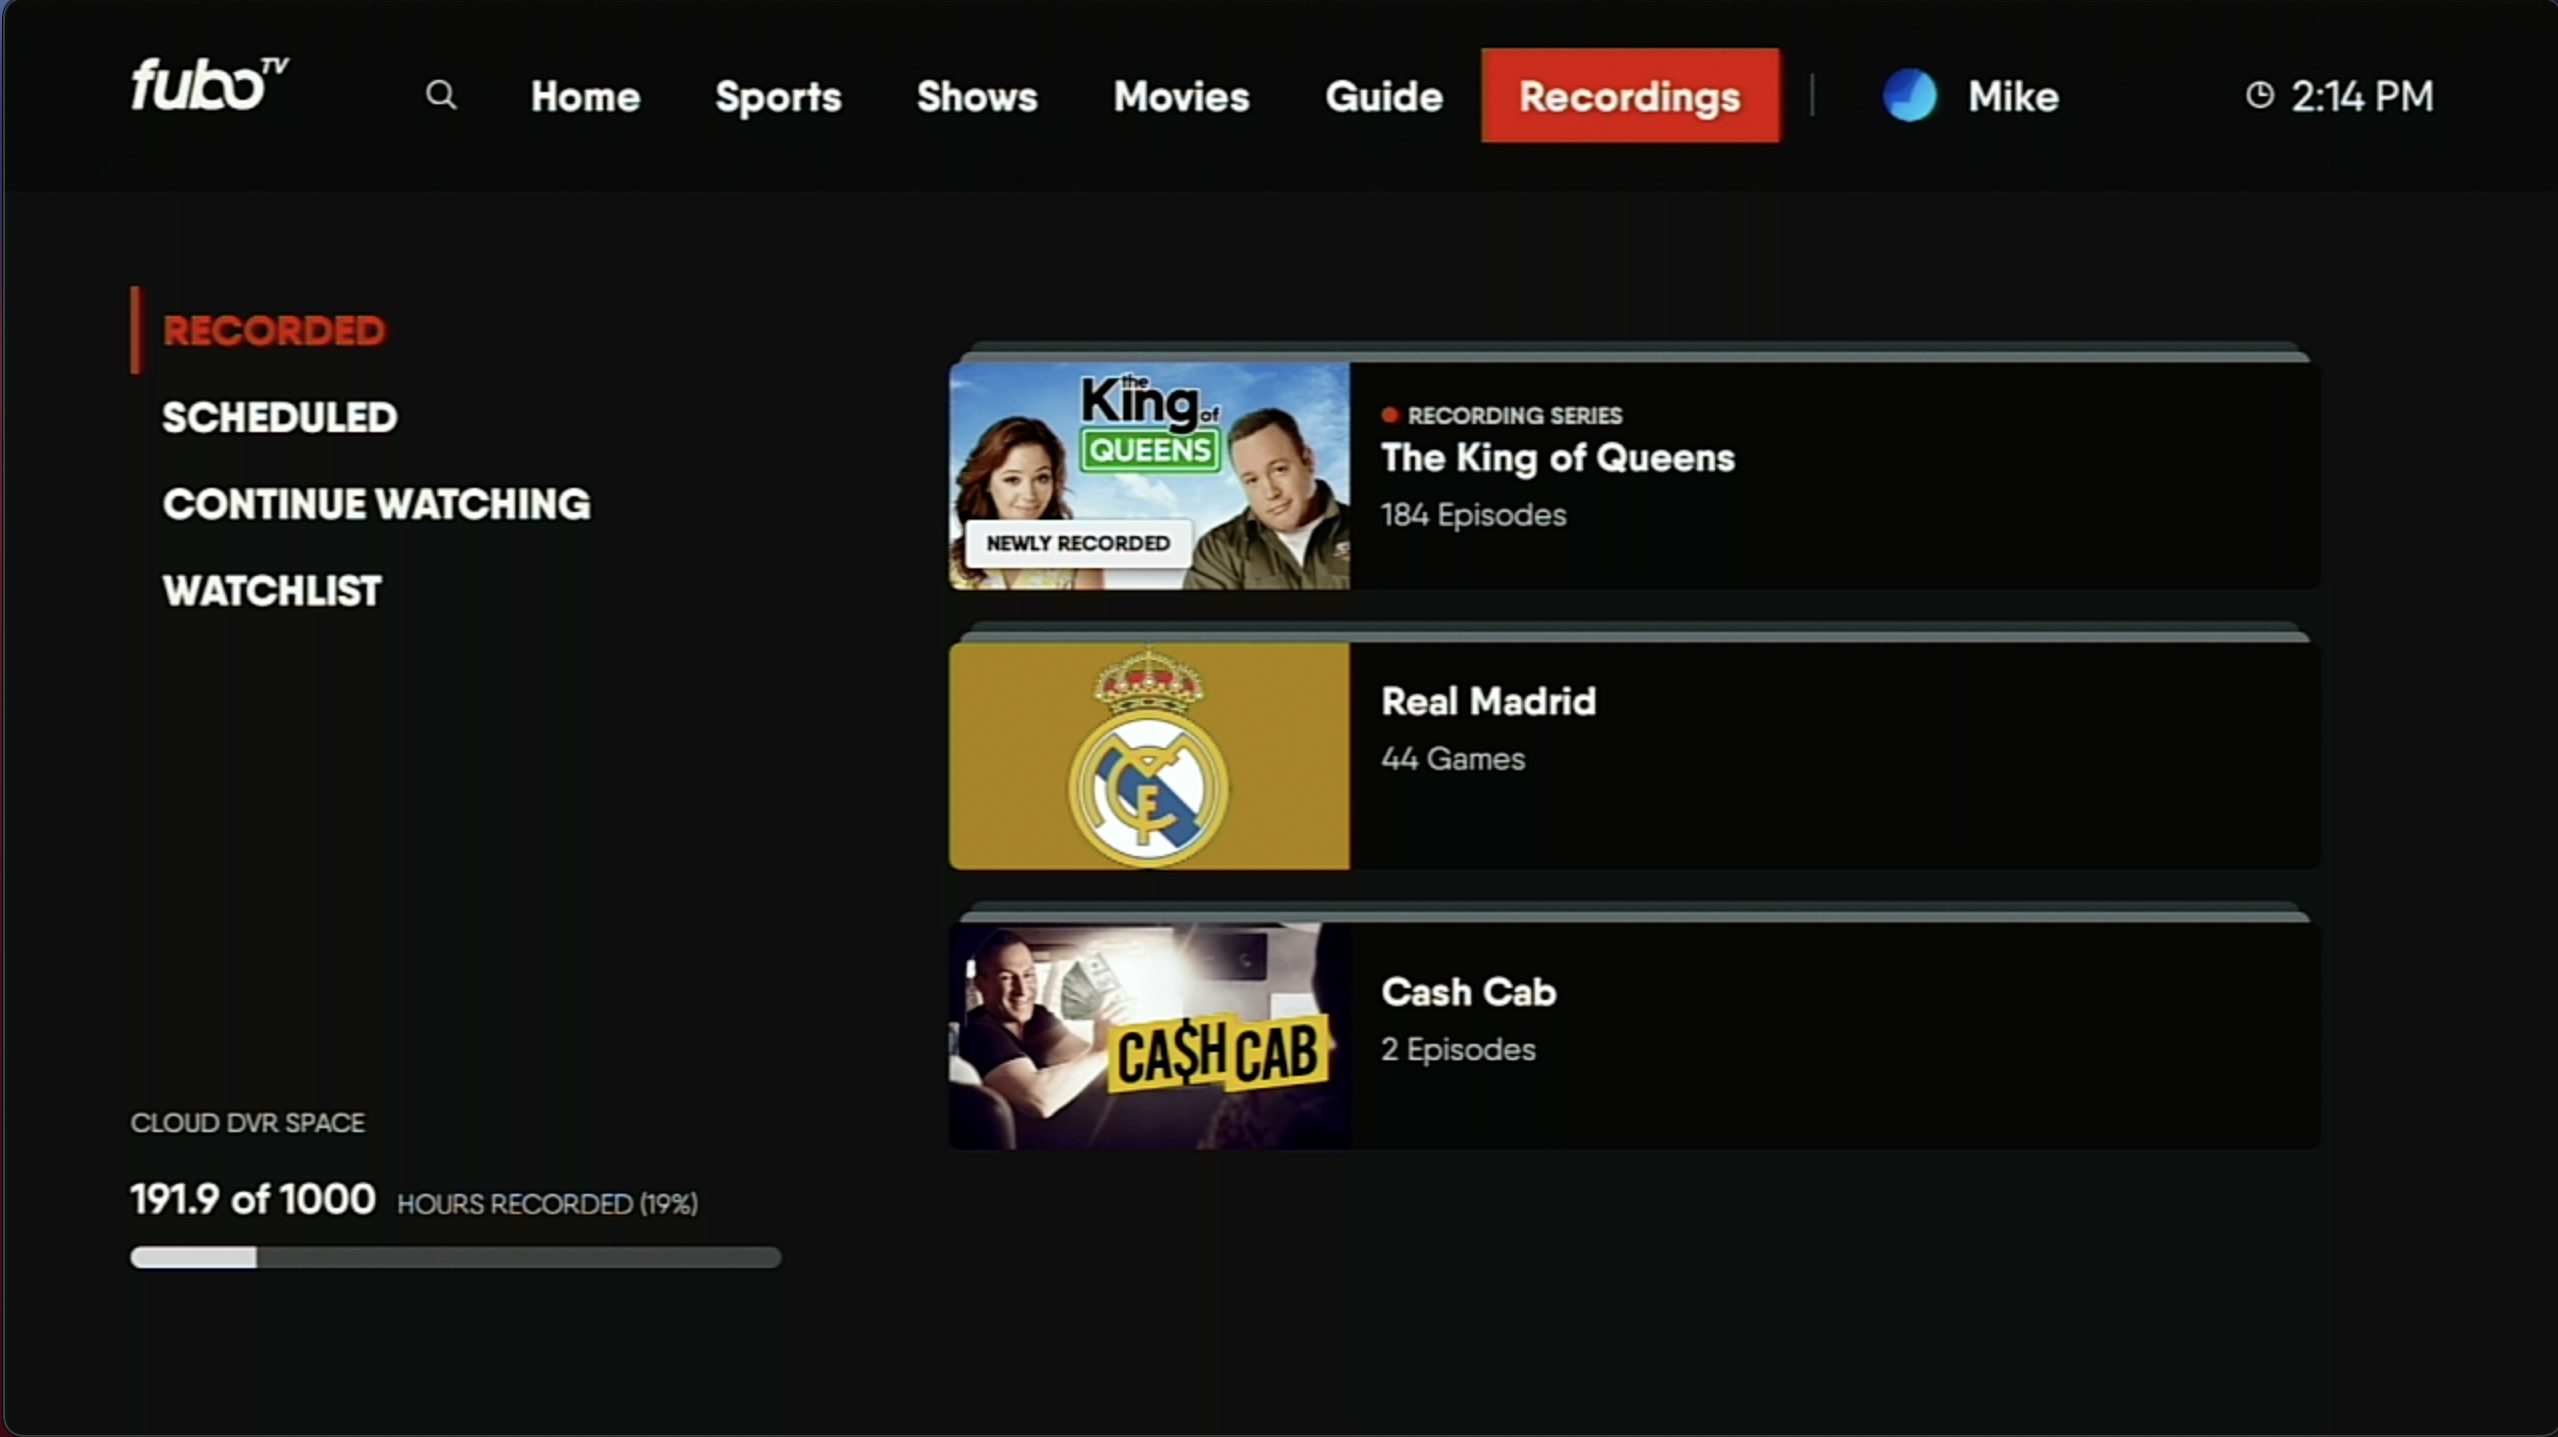 The Recordings option from the top menu of the FuboTV app on an Android TV is highlighted